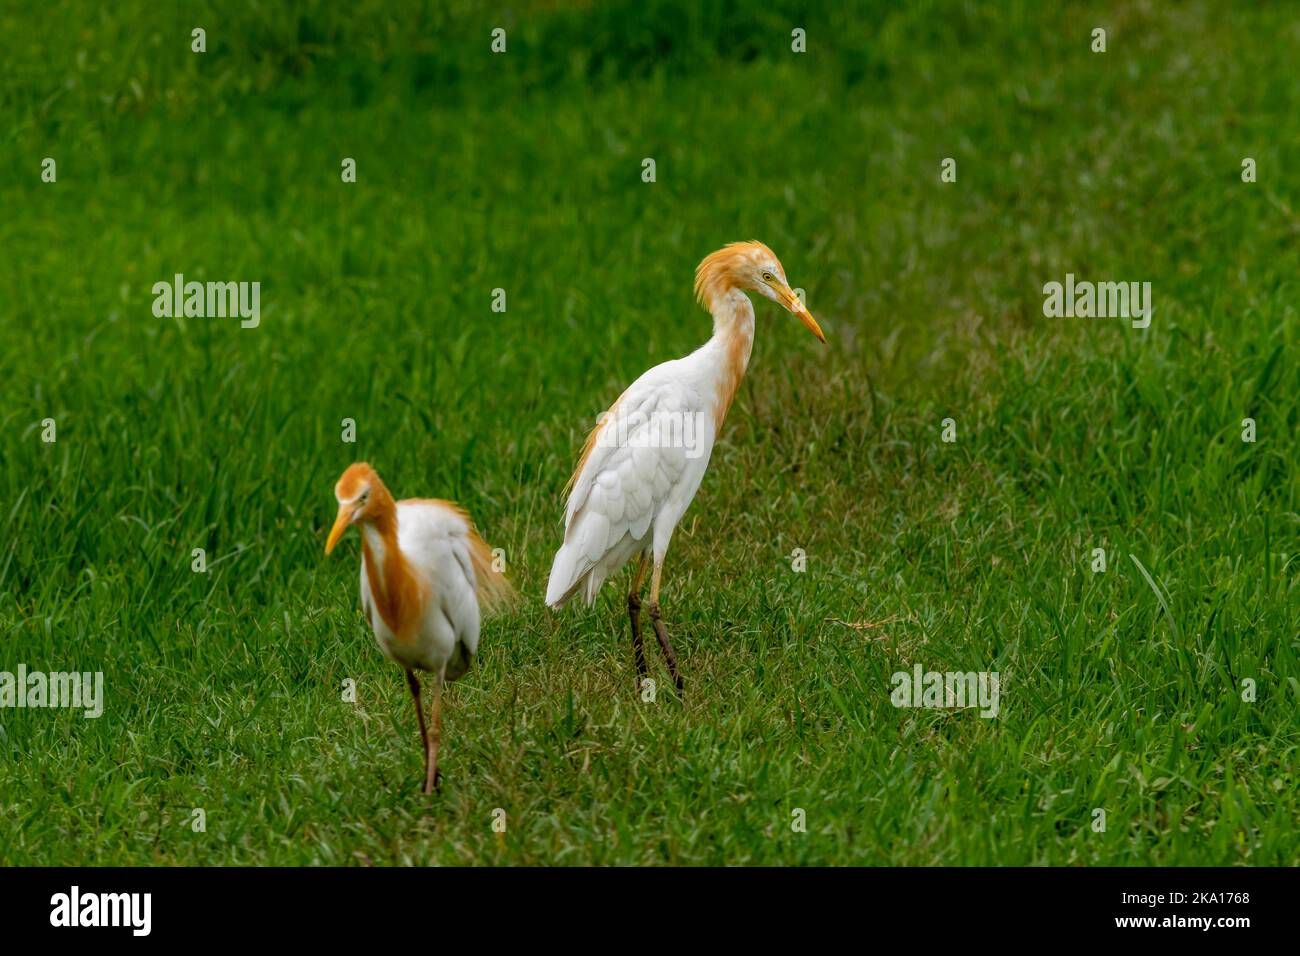 cattle egret or Bubulcus ibis in a breeding plumage in natural green background at keoladeo national park or bharatpur bird sanctuary rajasthan india Stock Photo